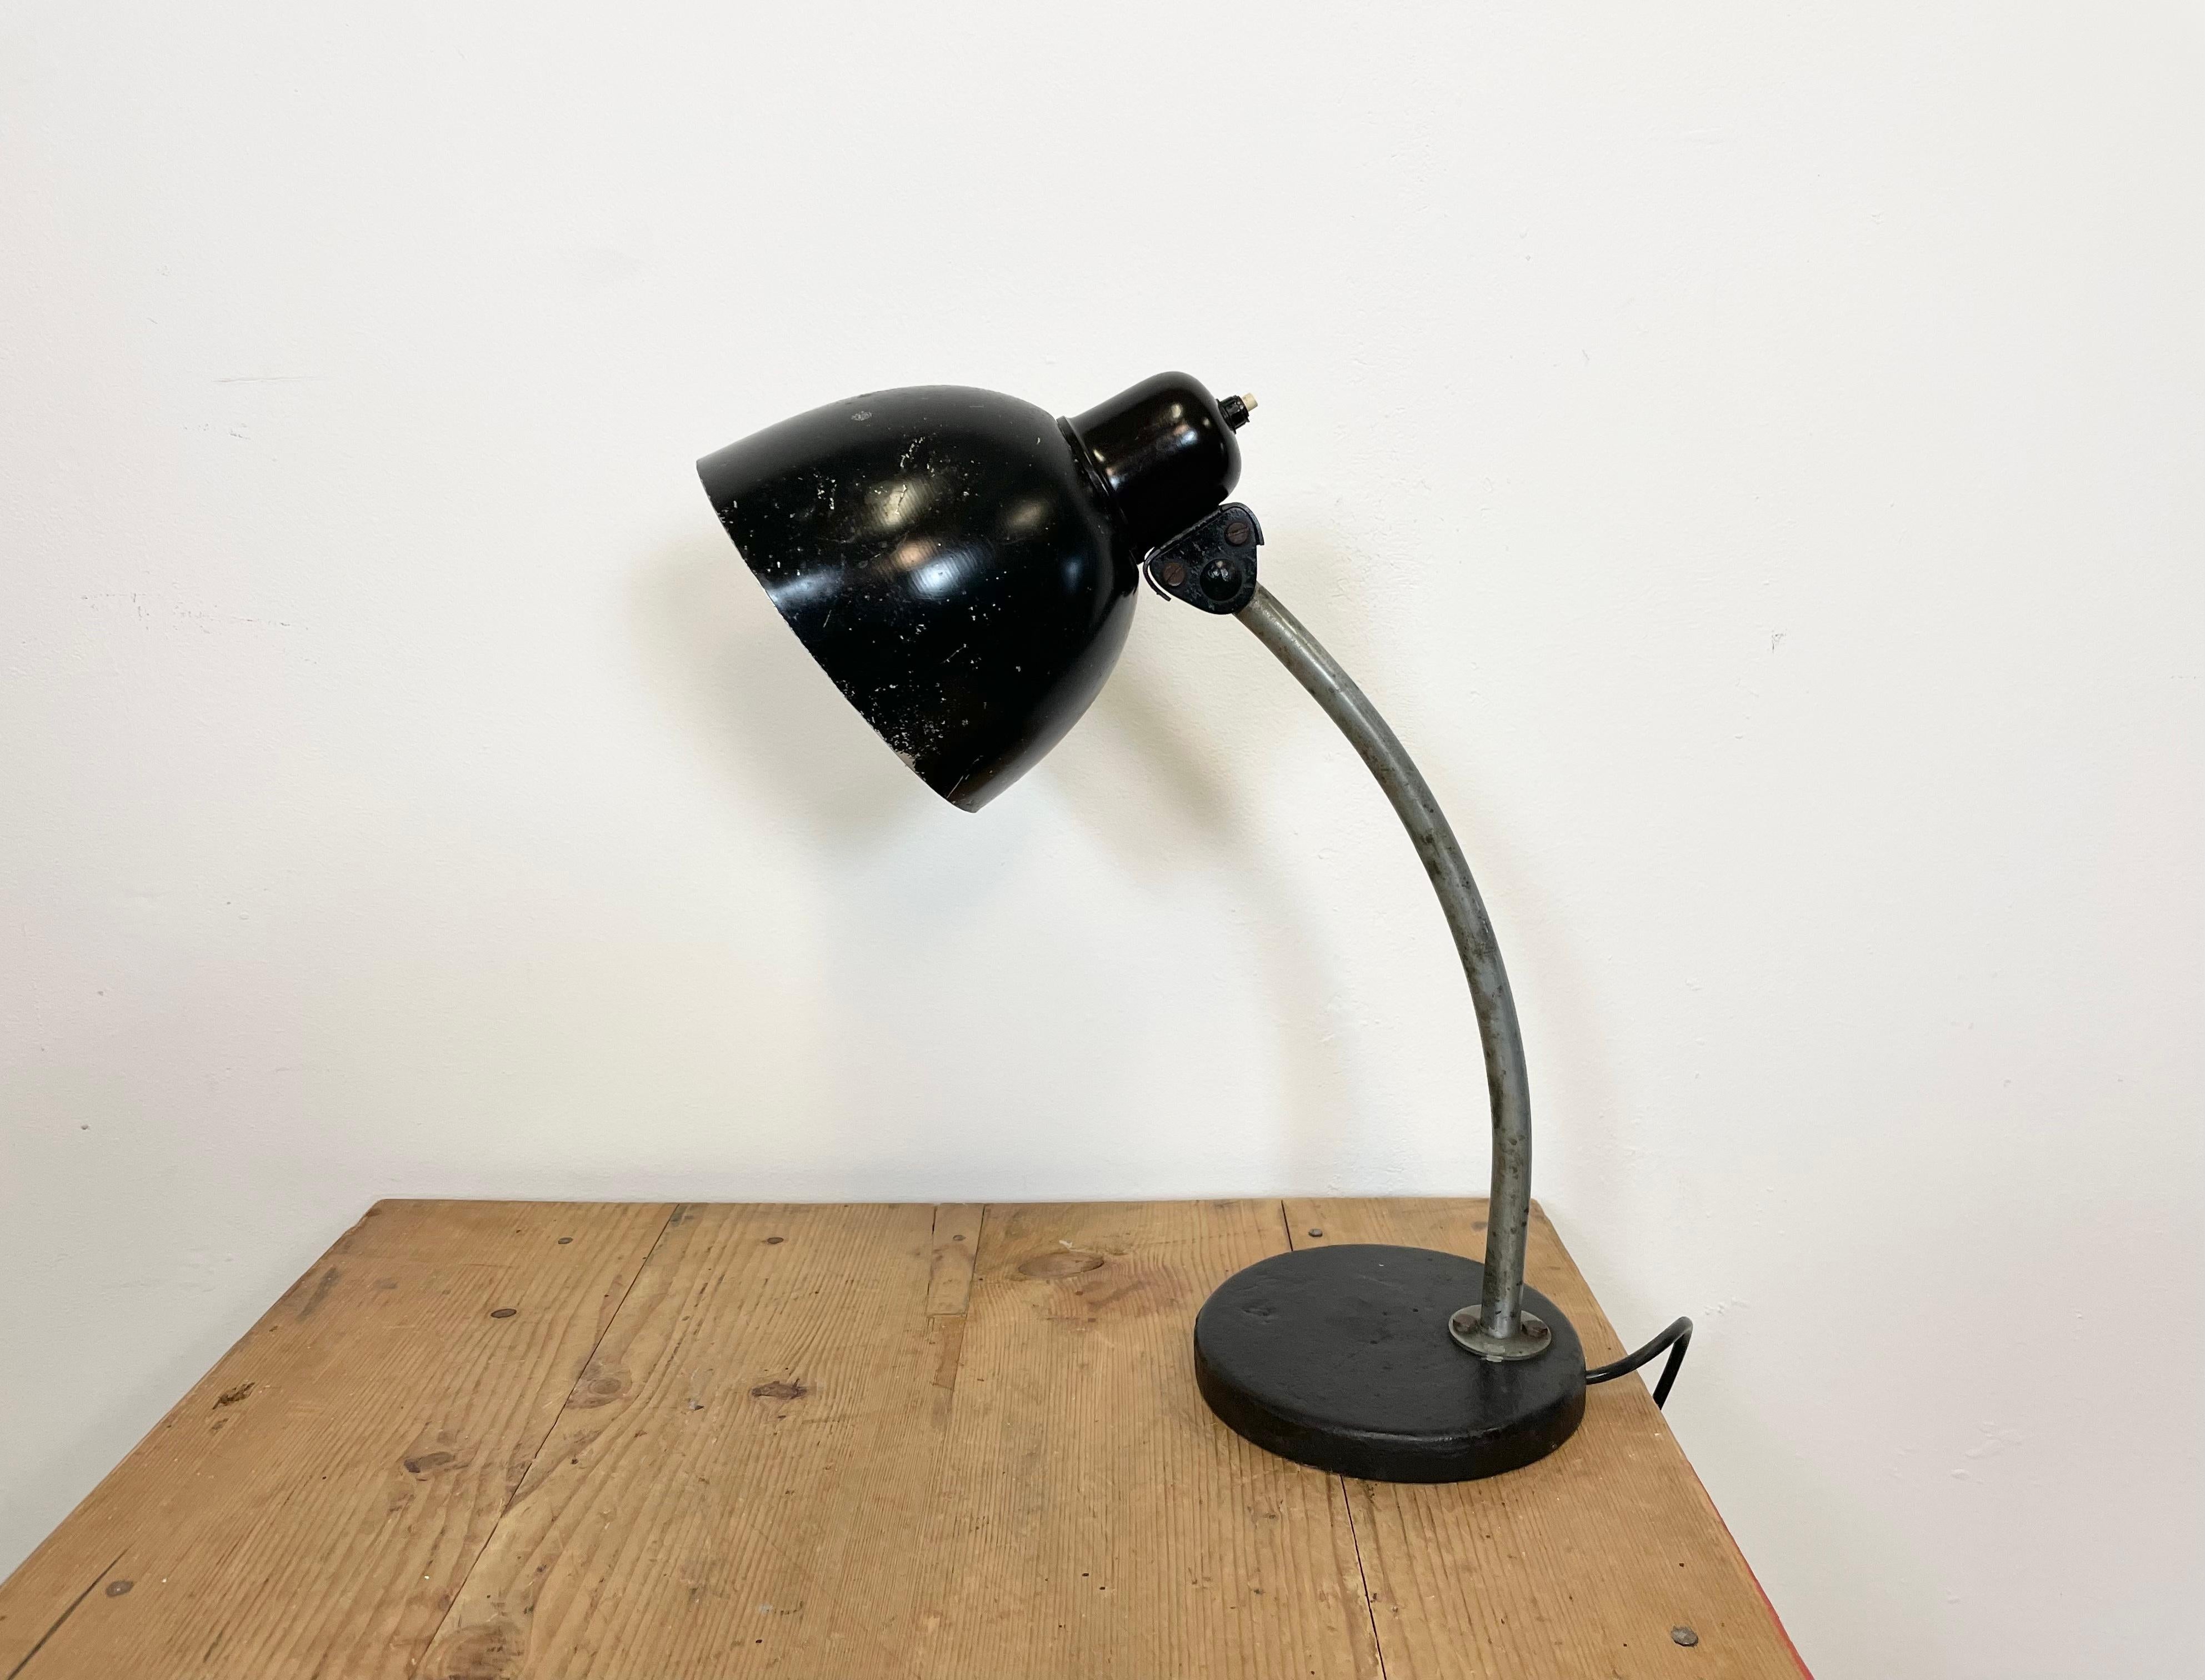 This black industrial workshop desk lamp was made in former Czechoslovakia during the 1950s. The lamp has an adjustable black aluminium shade with bakelite top, an iron base and arm.The socket requires E 27/ E 26 lightbulbs. New wire. Fully